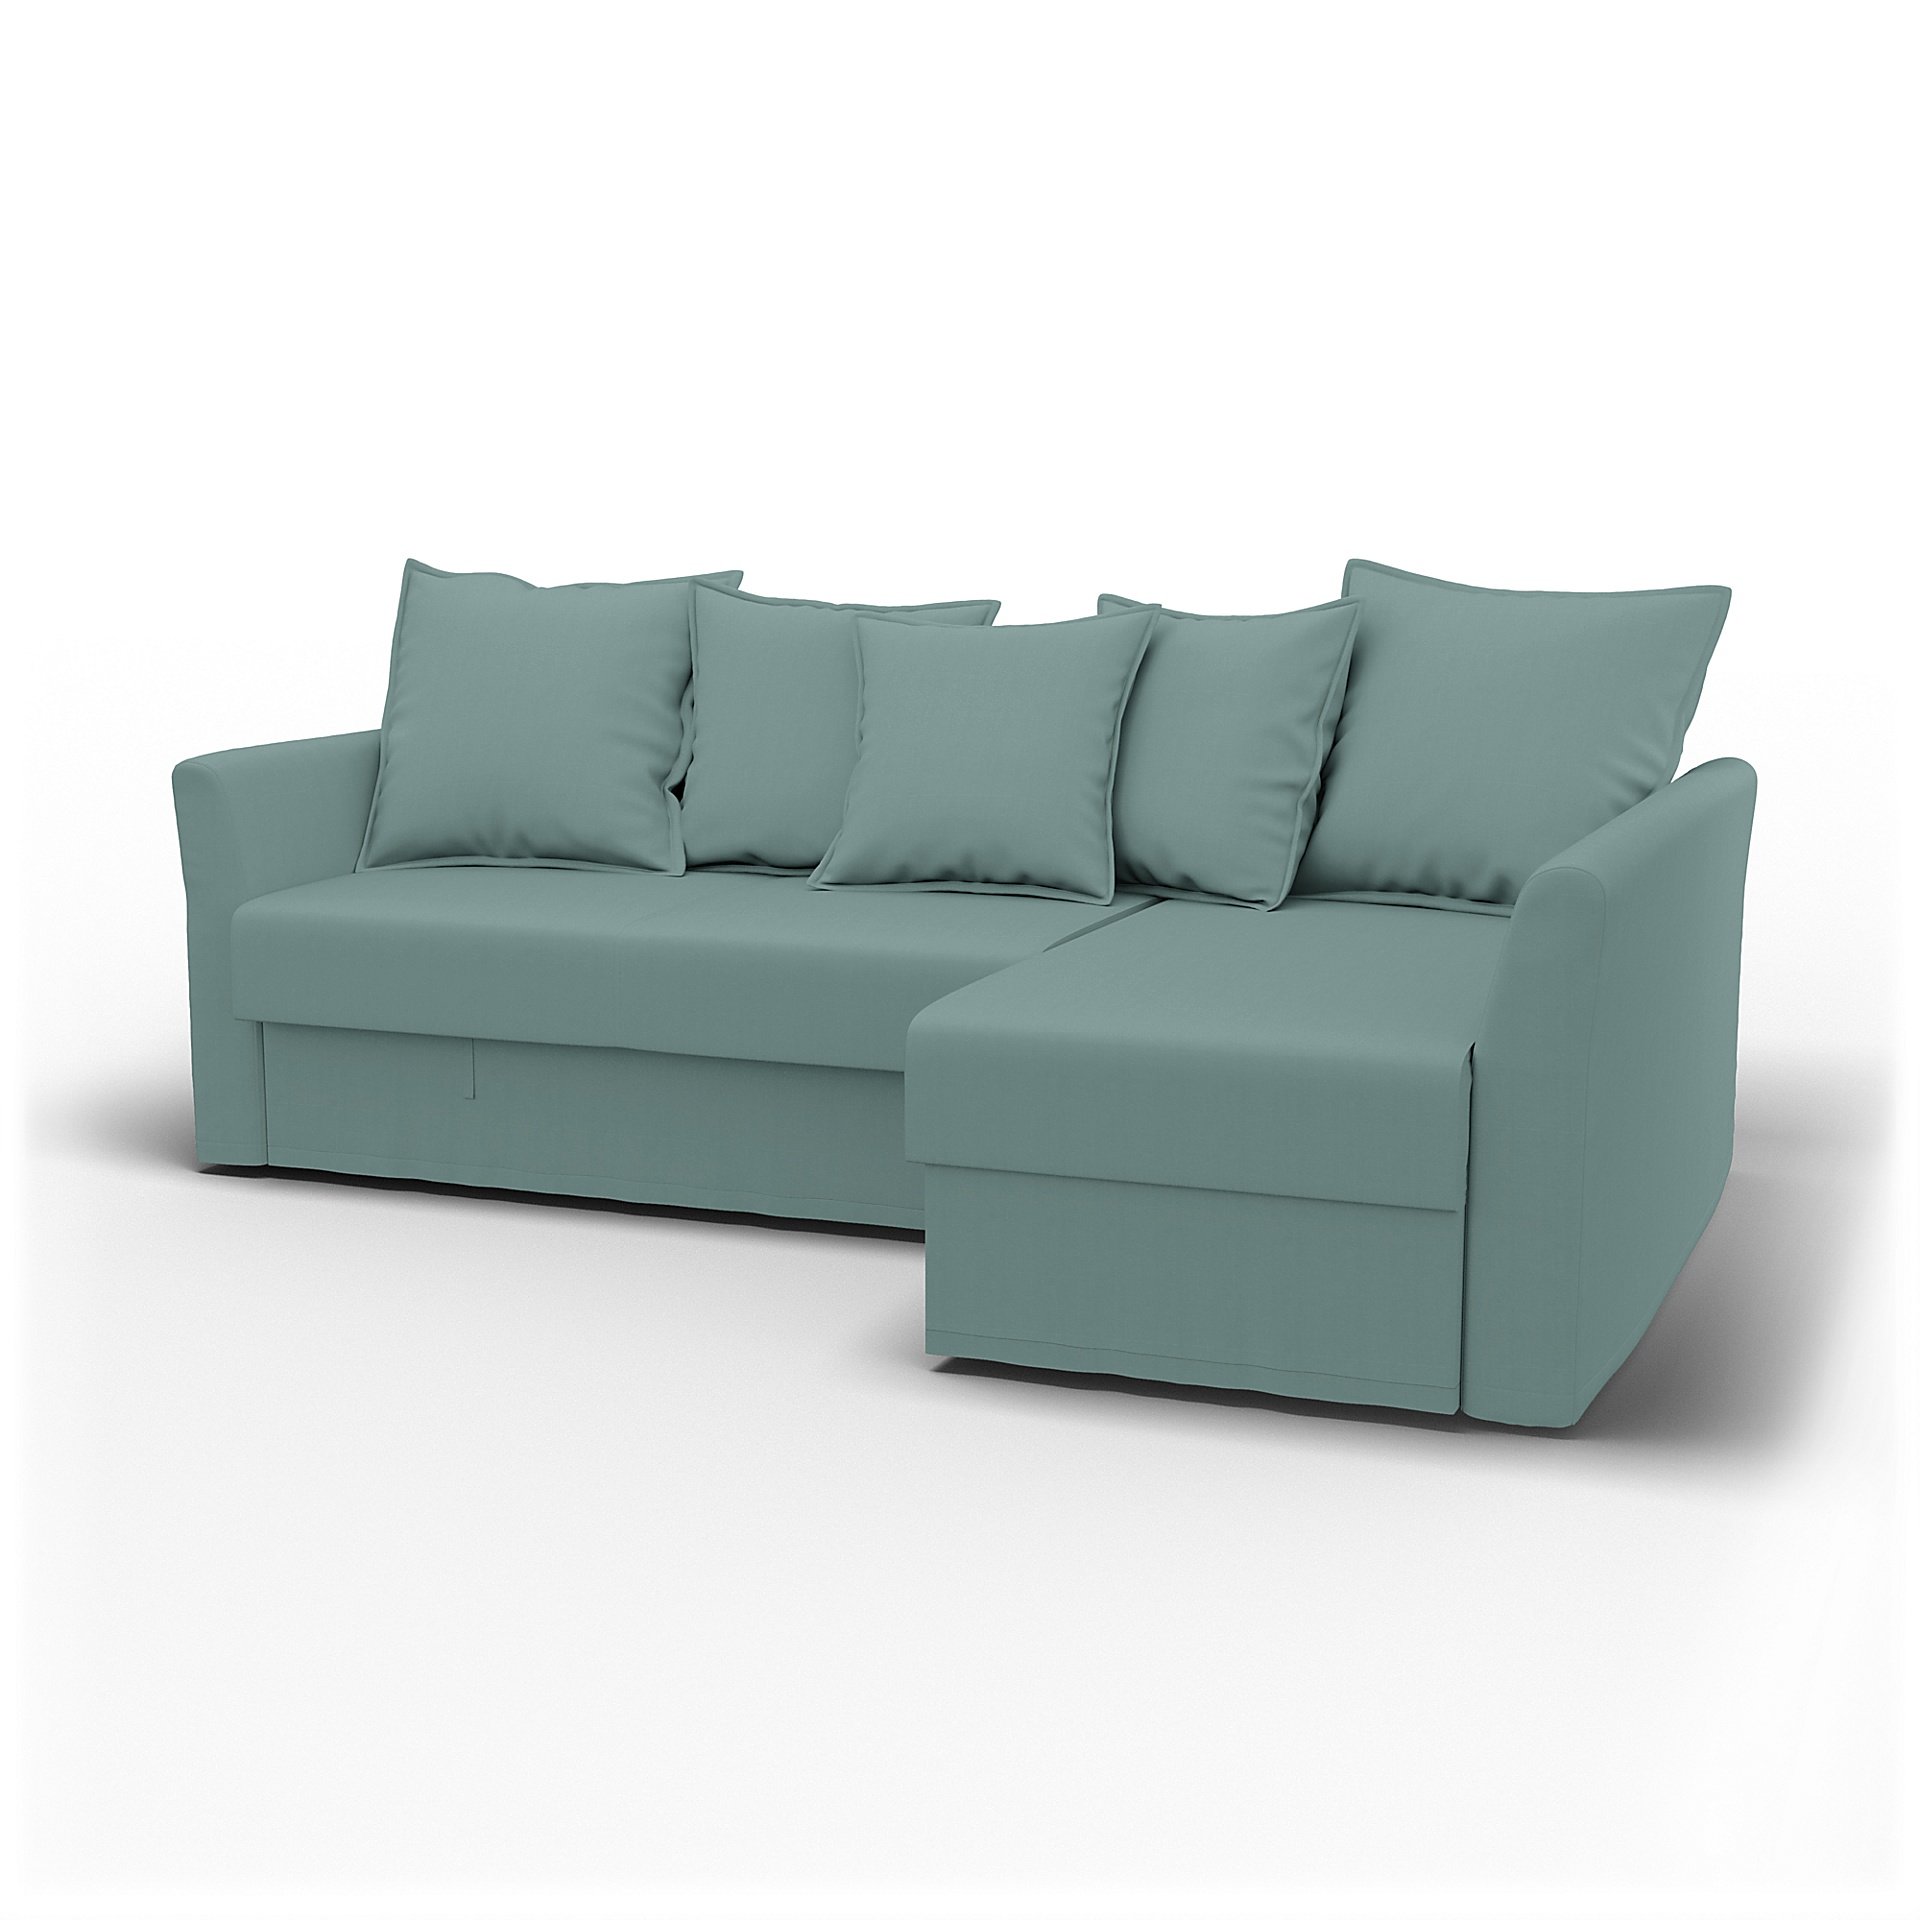 IKEA - Holmsund Sofabed with Chaiselongue, Mineral Blue, Cotton - Bemz